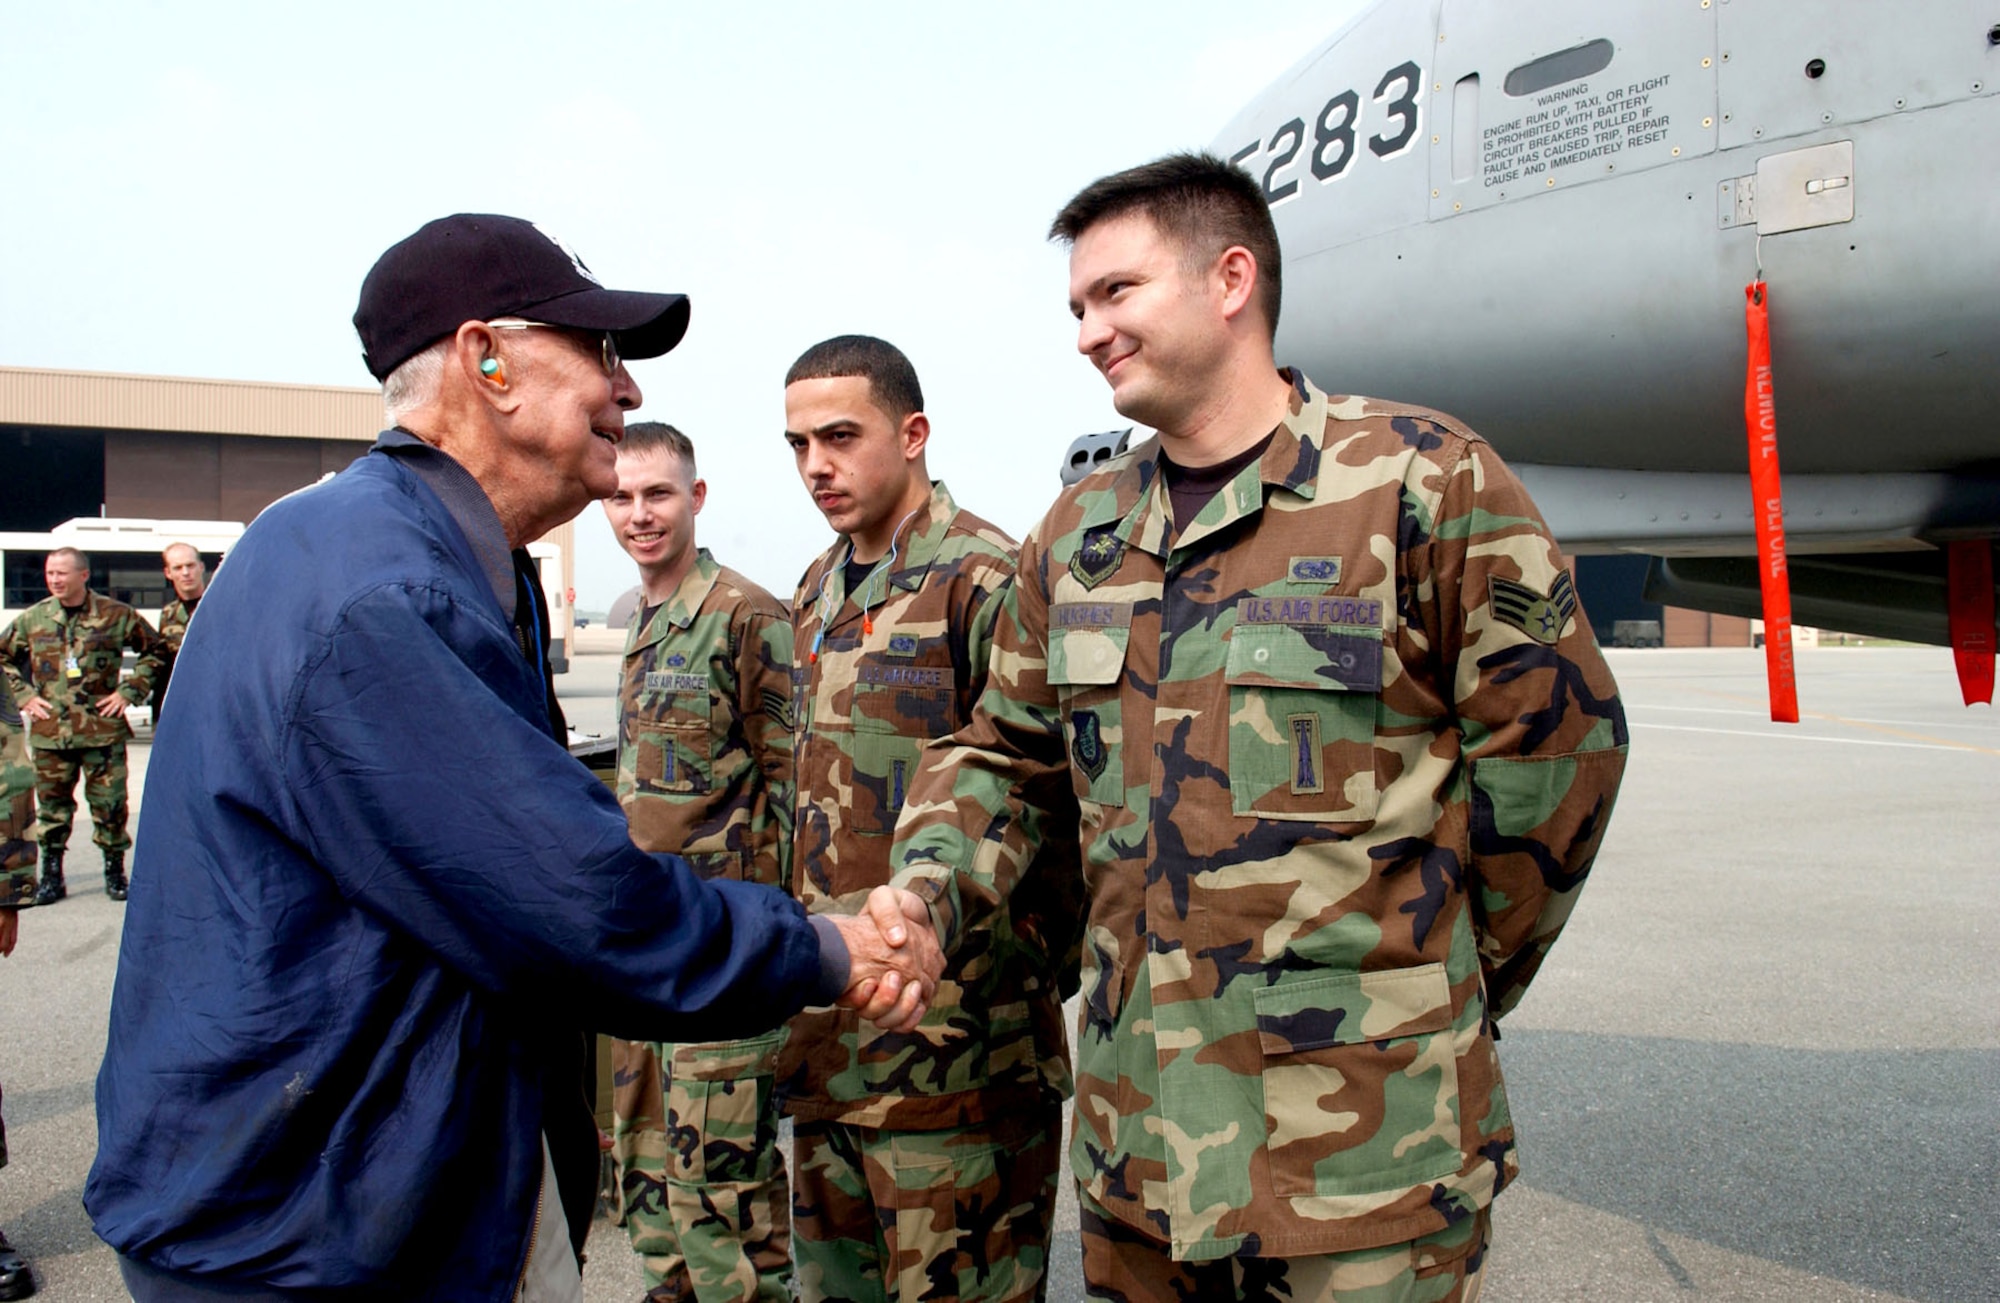 Generations connect: Air Force Korean War hero, POW and double ace Col. Harold Fischer greets 51st Fighter Wing personnel at Osan Air Base, Republic of Korea, in 2007. Fischer's story is highlighted in the Korean War Gallery at the National Museum of the U.S. Air Force. (U.S. Air Force photo)